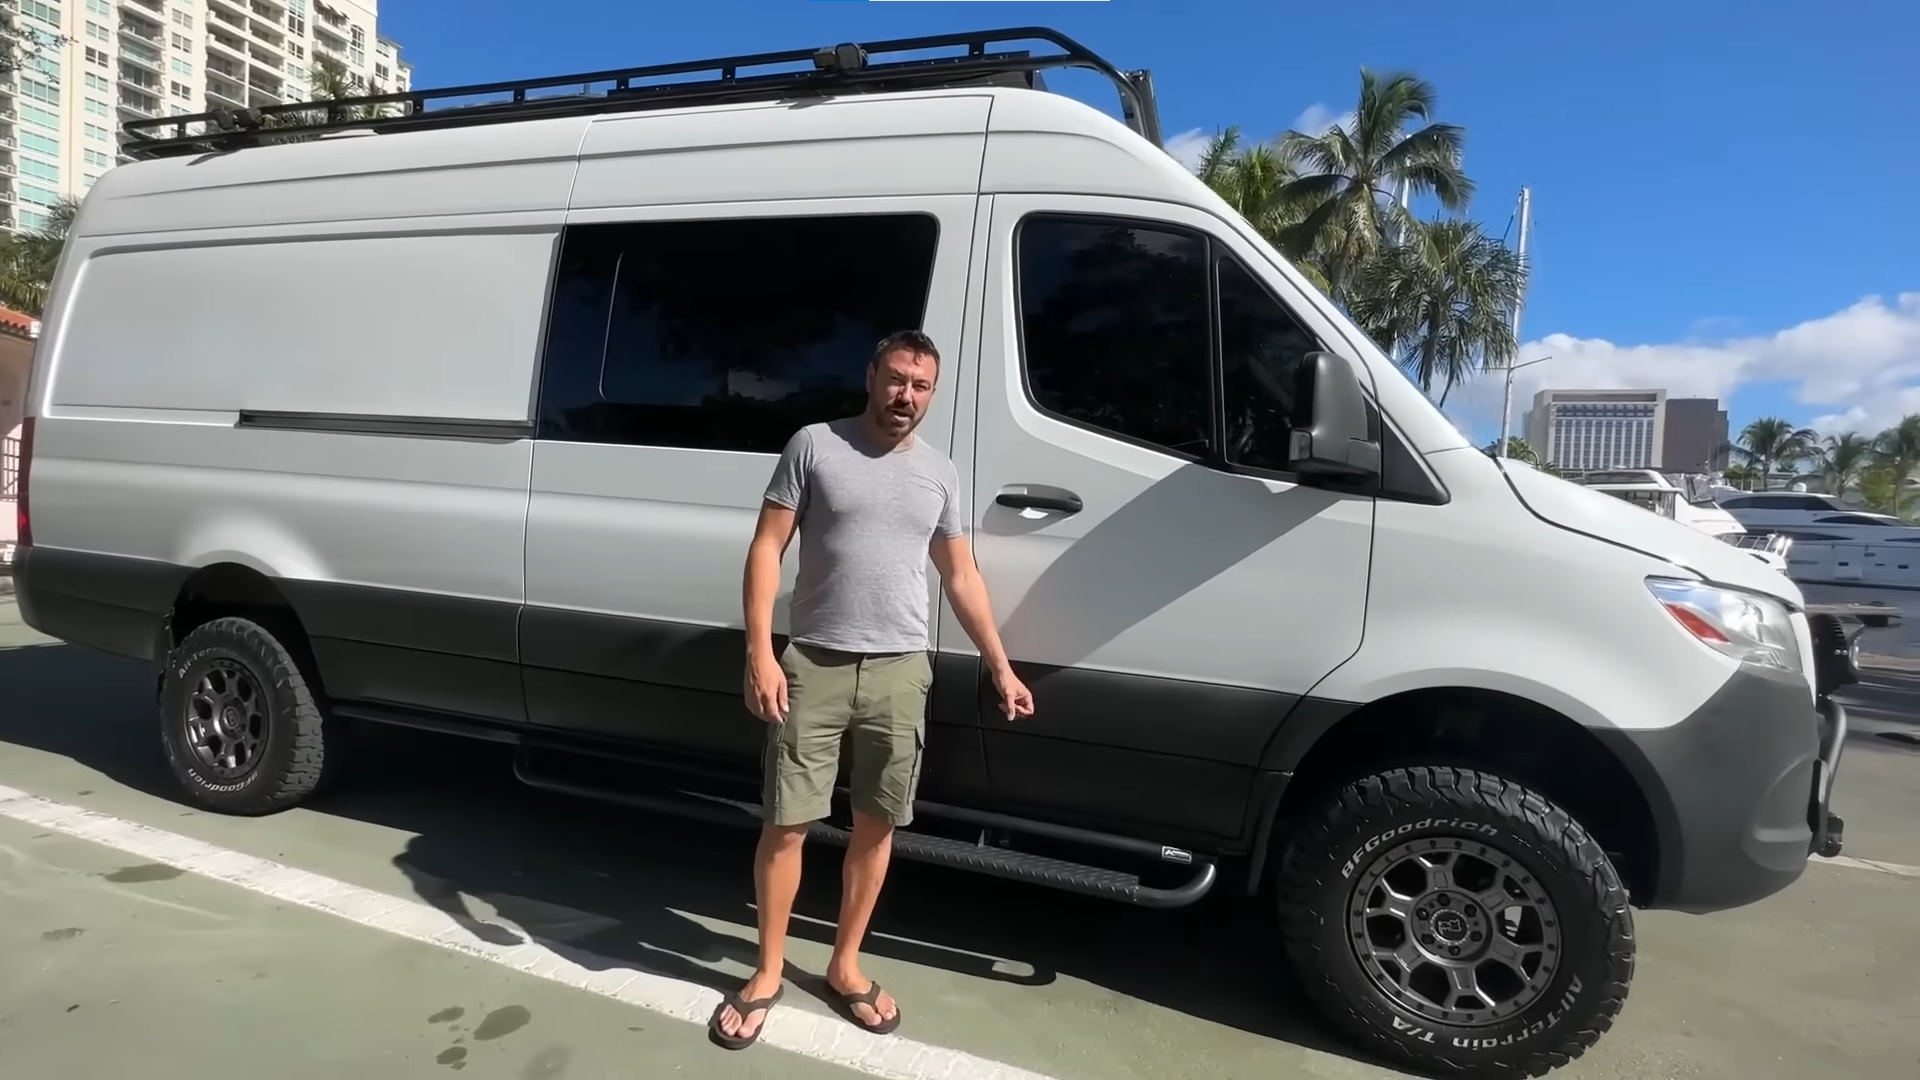 Mercedes Sprinter Camper Van Comes With Off-Road Upgrades and an Indoor,  Exposed Shower - autoevolution